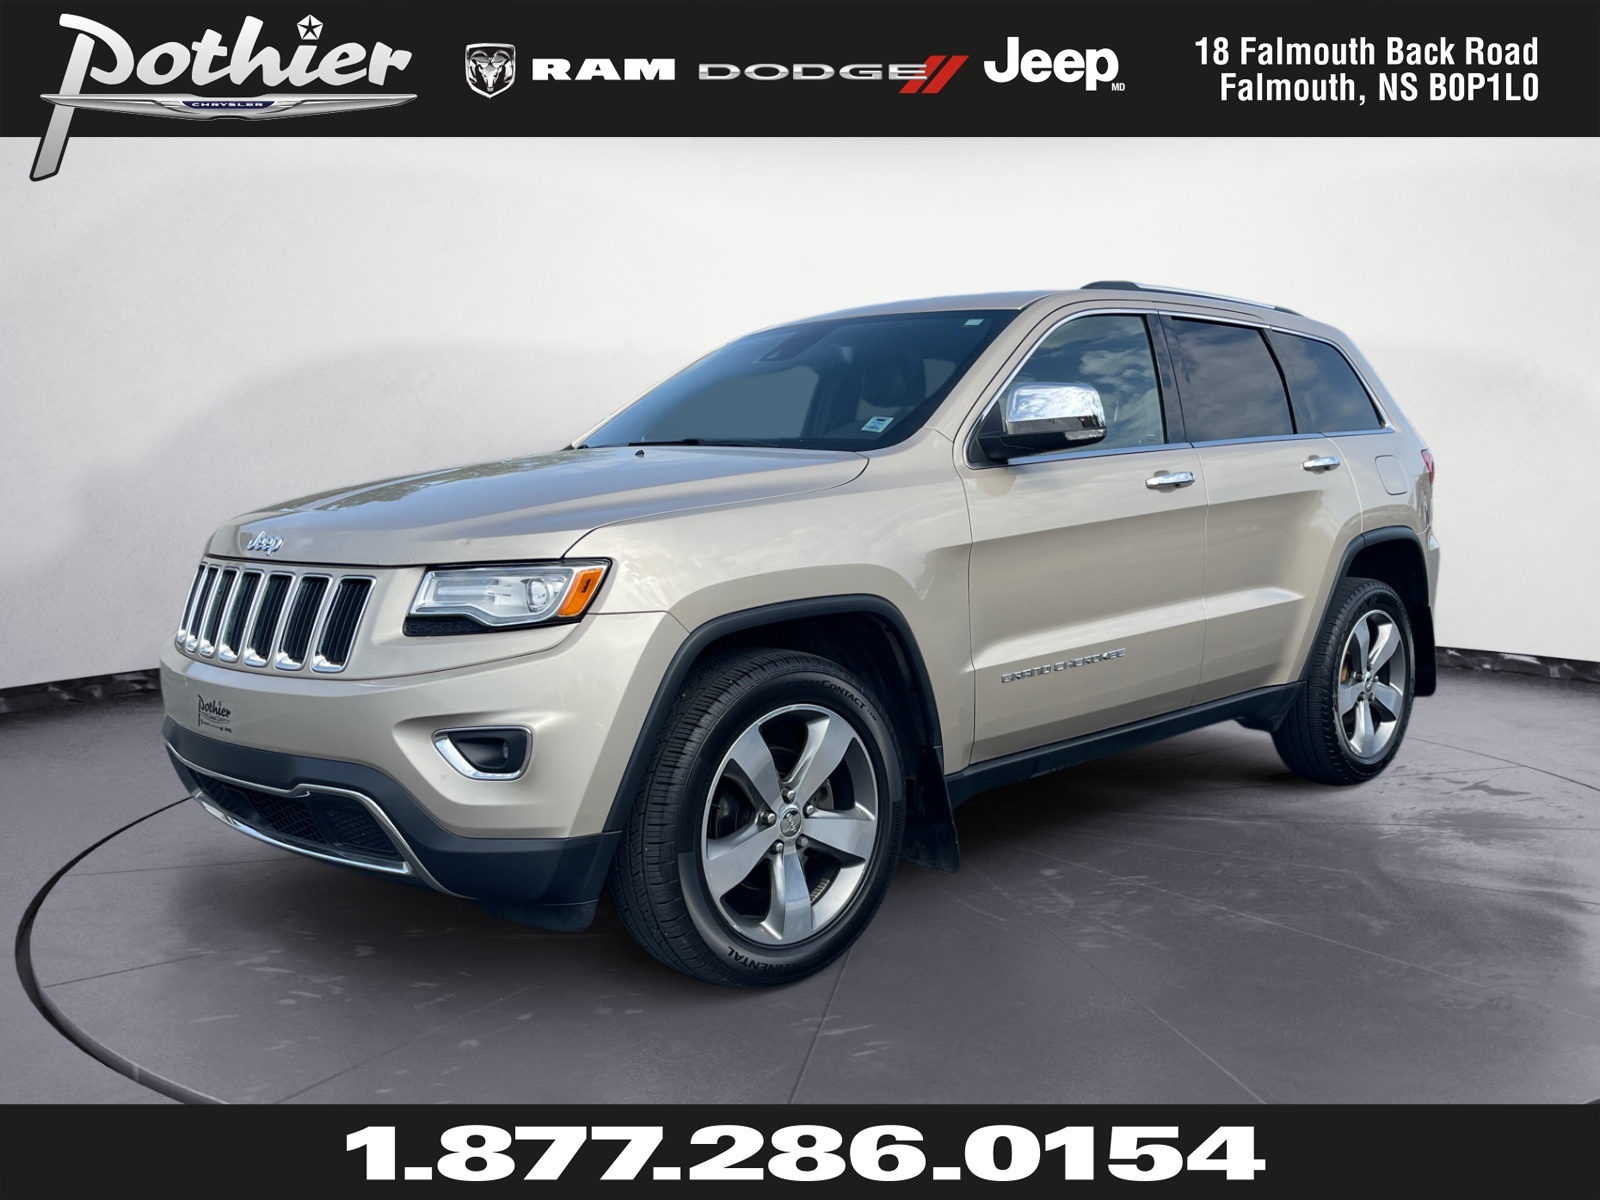 2015 Jeep Grand Cherokee 8.4” Touchscreen – Heated/Vented Seats – 4X4